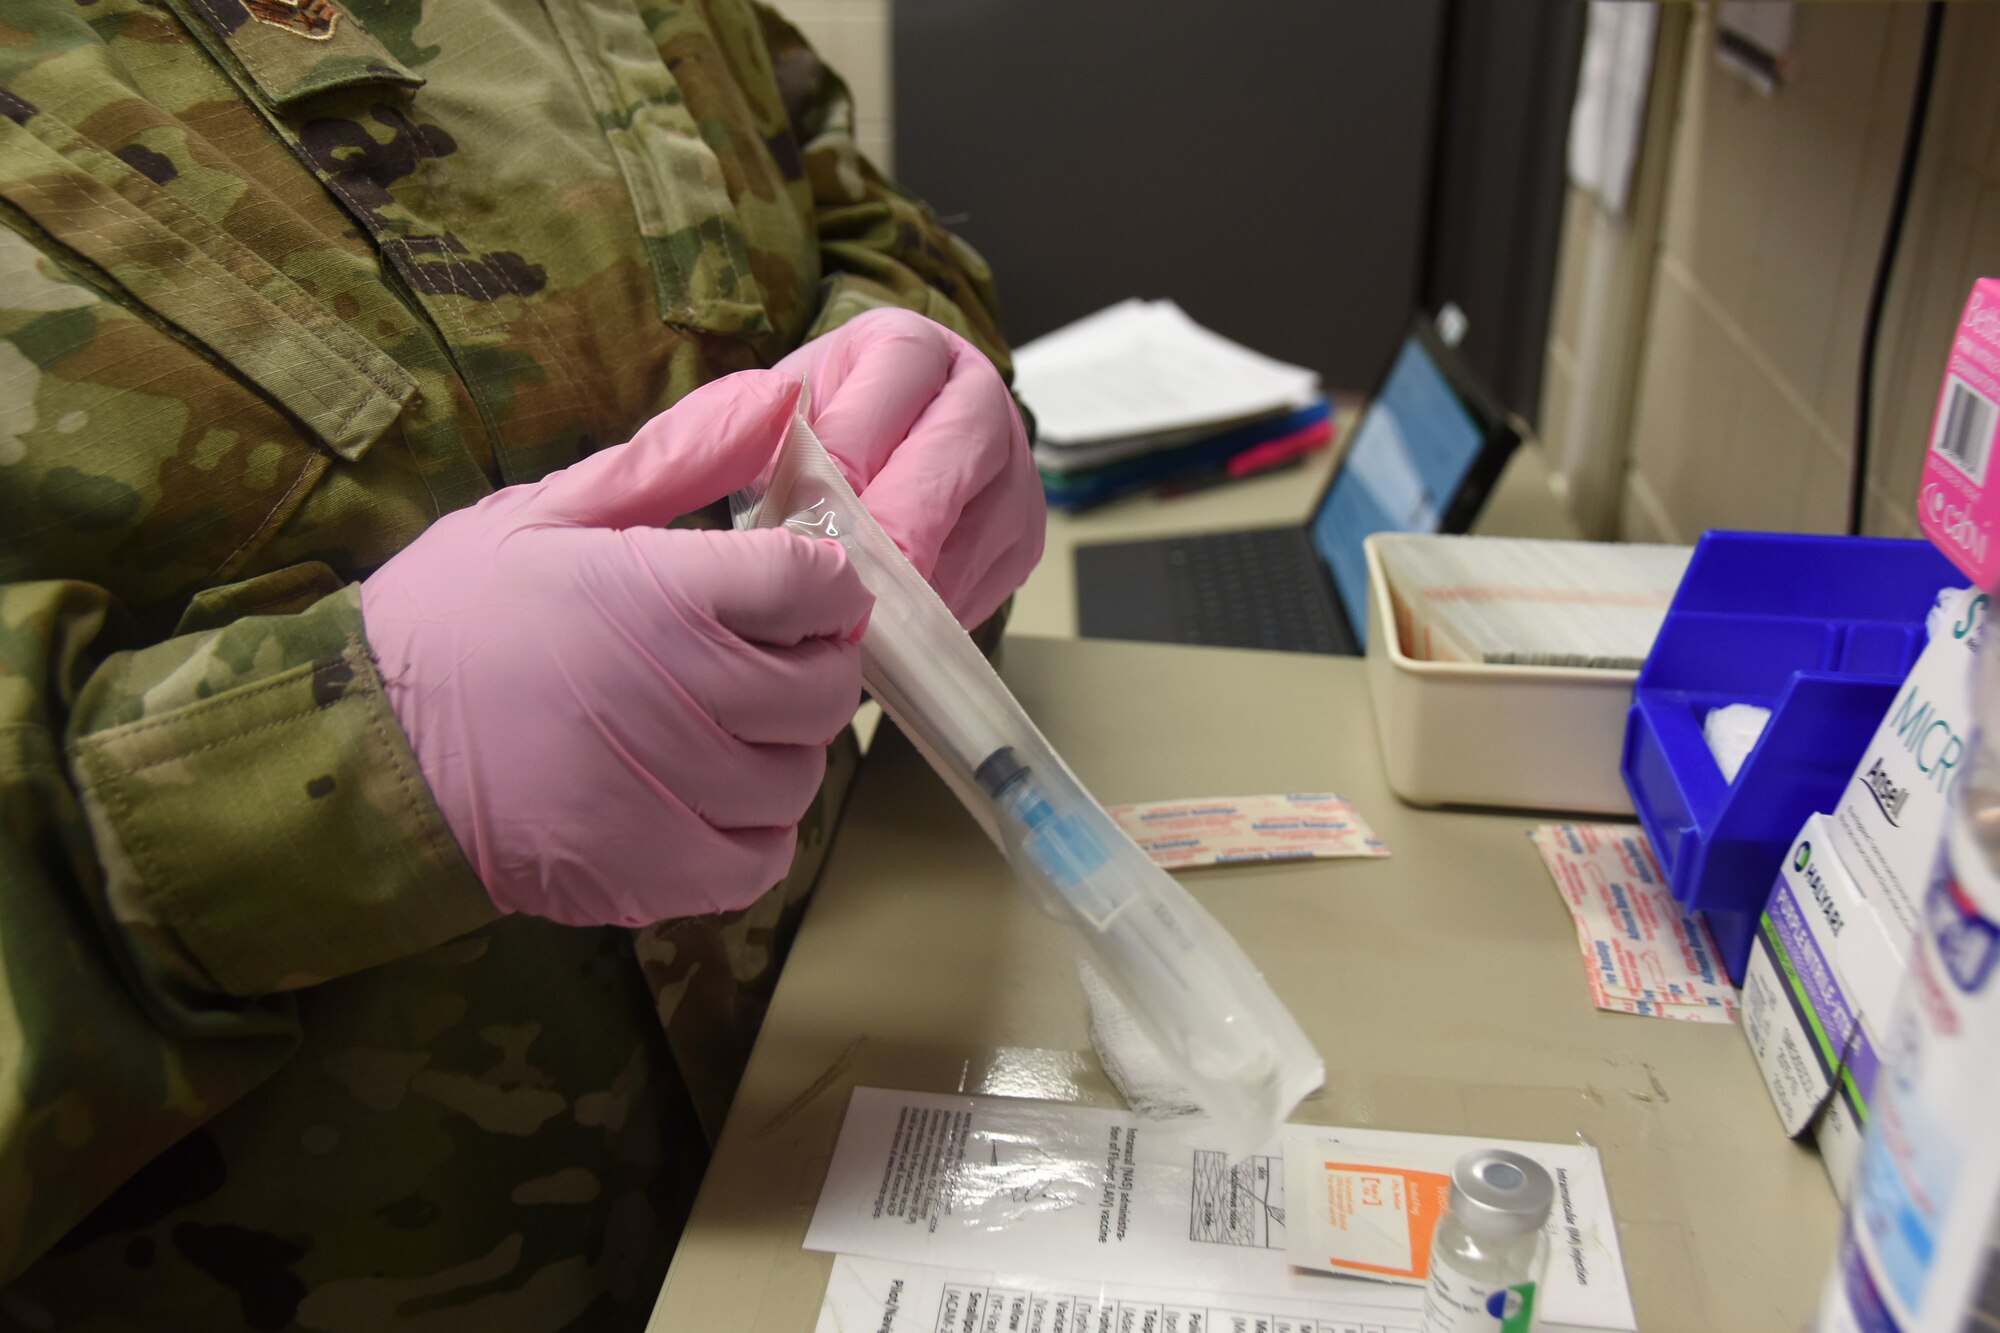 U.S. Air Force Senior Airman Cynthia Ford, 145th Medical Group technician, readies a needle in preparation for giving an immunization at the North Carolina Air National Guard Base, Charlotte Douglas International Airport, March 7, 2020. Senior Airman Ford works as a traditional Guardsman, but also serves, in her civilian life, as a Manager for the Department of Juvenile Justice in Marion, South Carolina. (U.S. Air Force photo by Staff Sgt. Laura Montgomery)